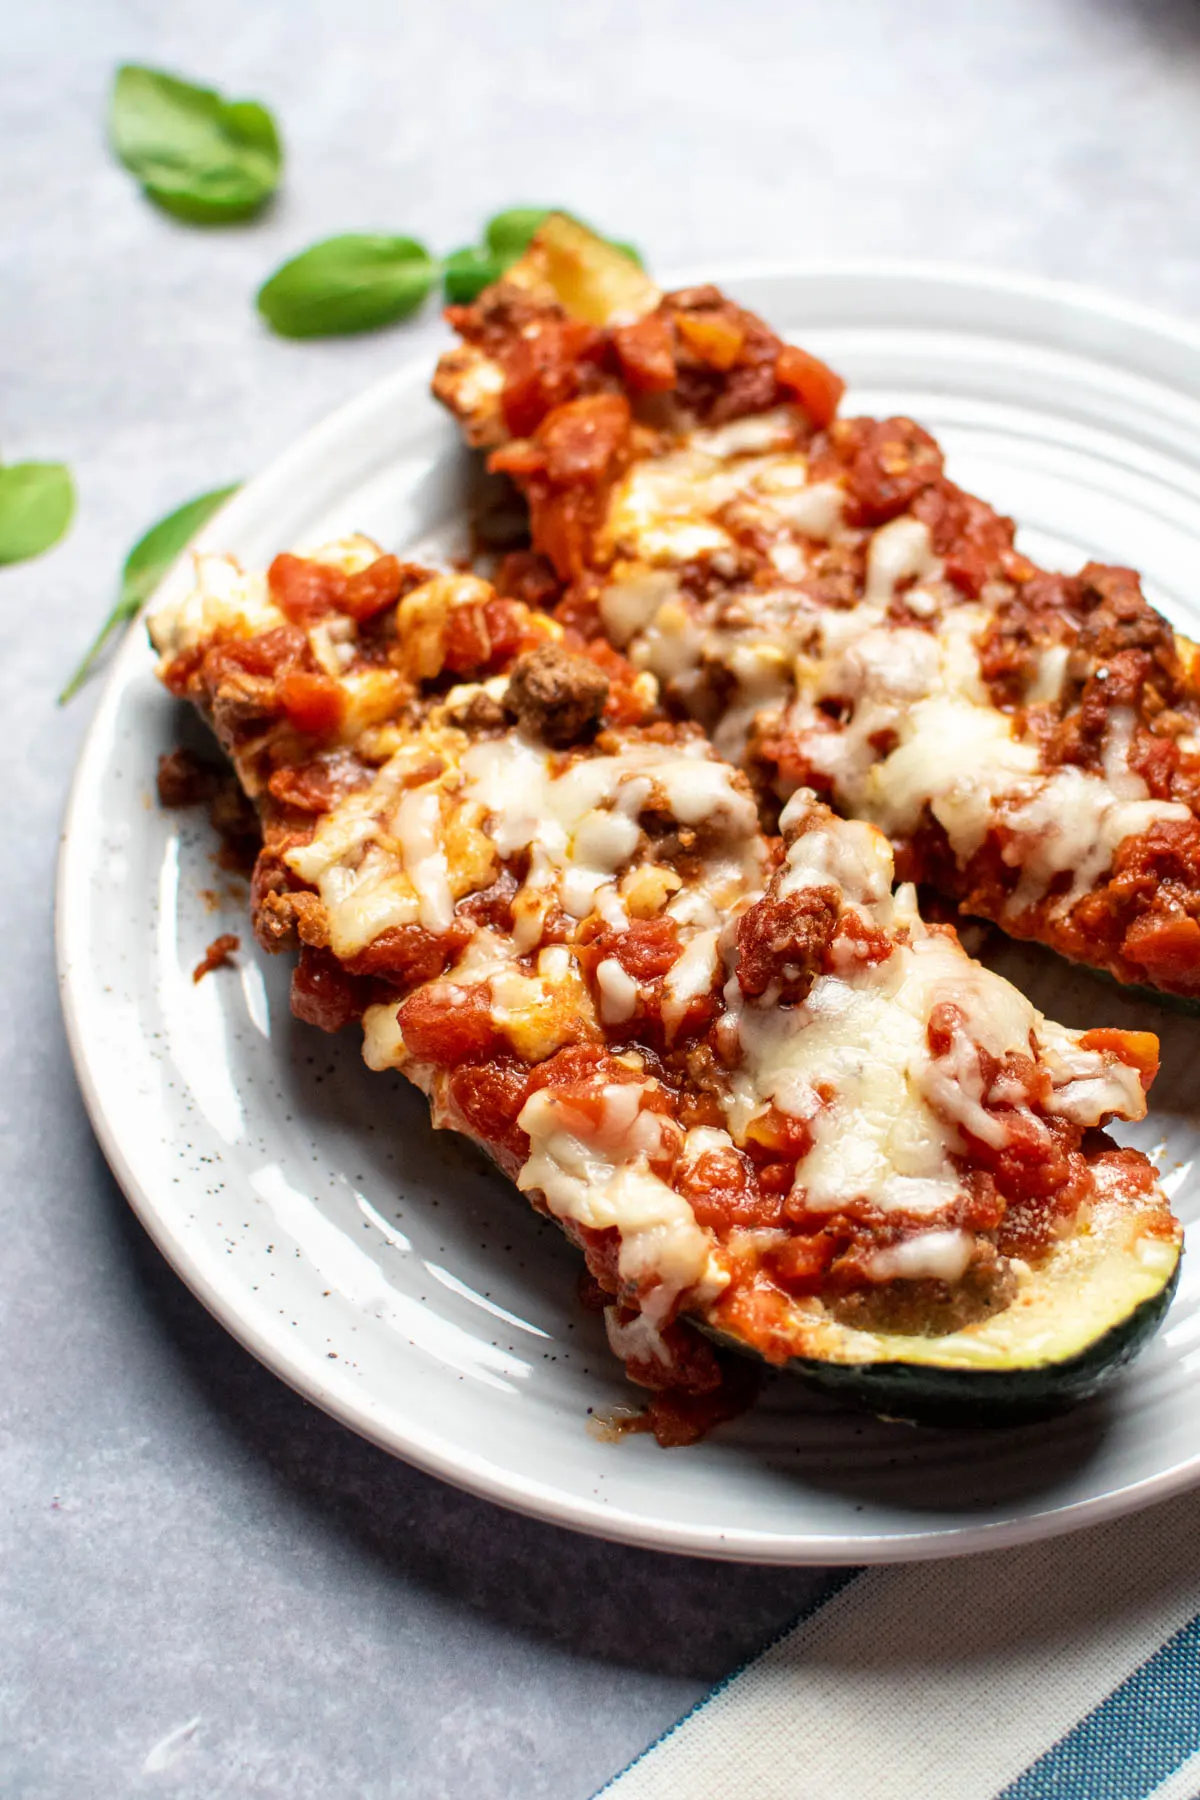 Two zucchini boats with ground beef, mozzarella, and tomatoes, on plate.